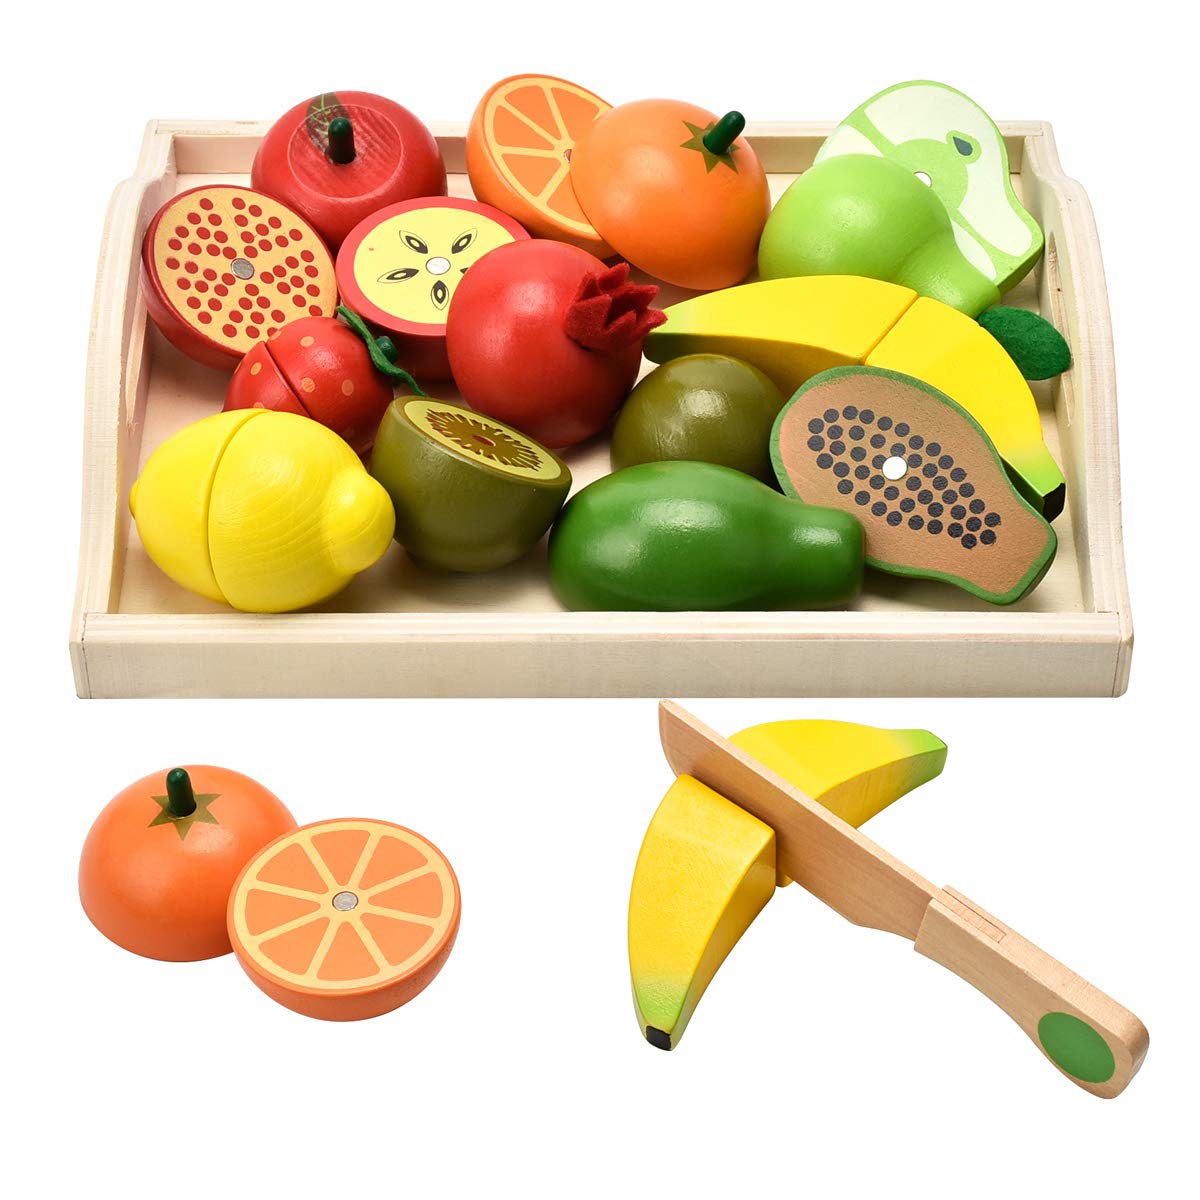 CARLORBO Wooden Toys for 2 Year Old - Pretend Play Food Set for Kids Play Kitchen,9 Cuttable Toy Fruit and Veg with Wooden Knif and Tray,Gift Idea for Boy Girl Birthday